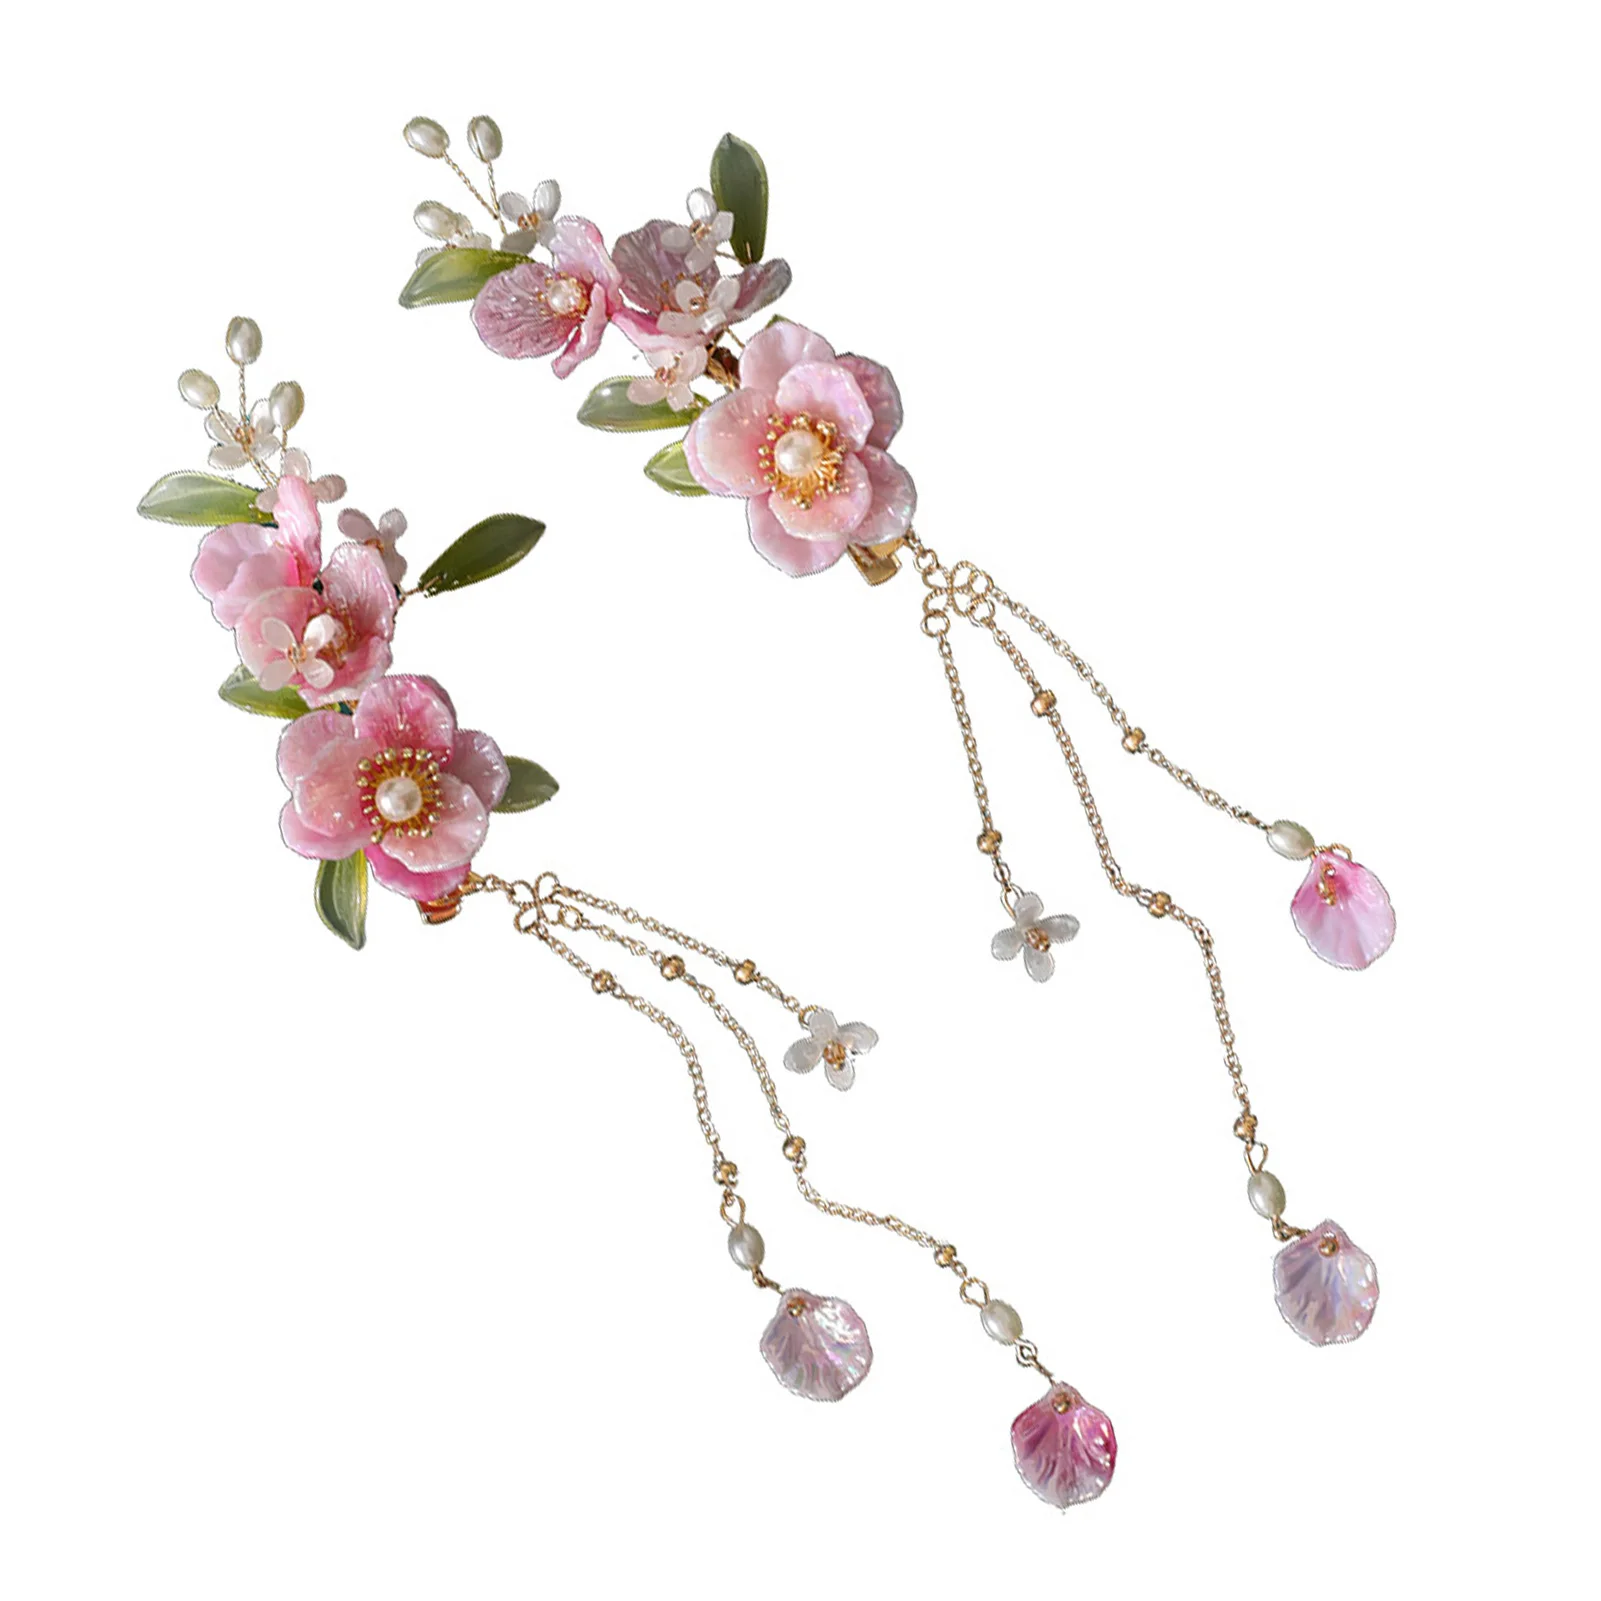 

Chinese Style Coloured Glaze Hairpins Stable Grip Bellflowers Flowers Headpiece with Tassels for Thick Curly Hair Styling